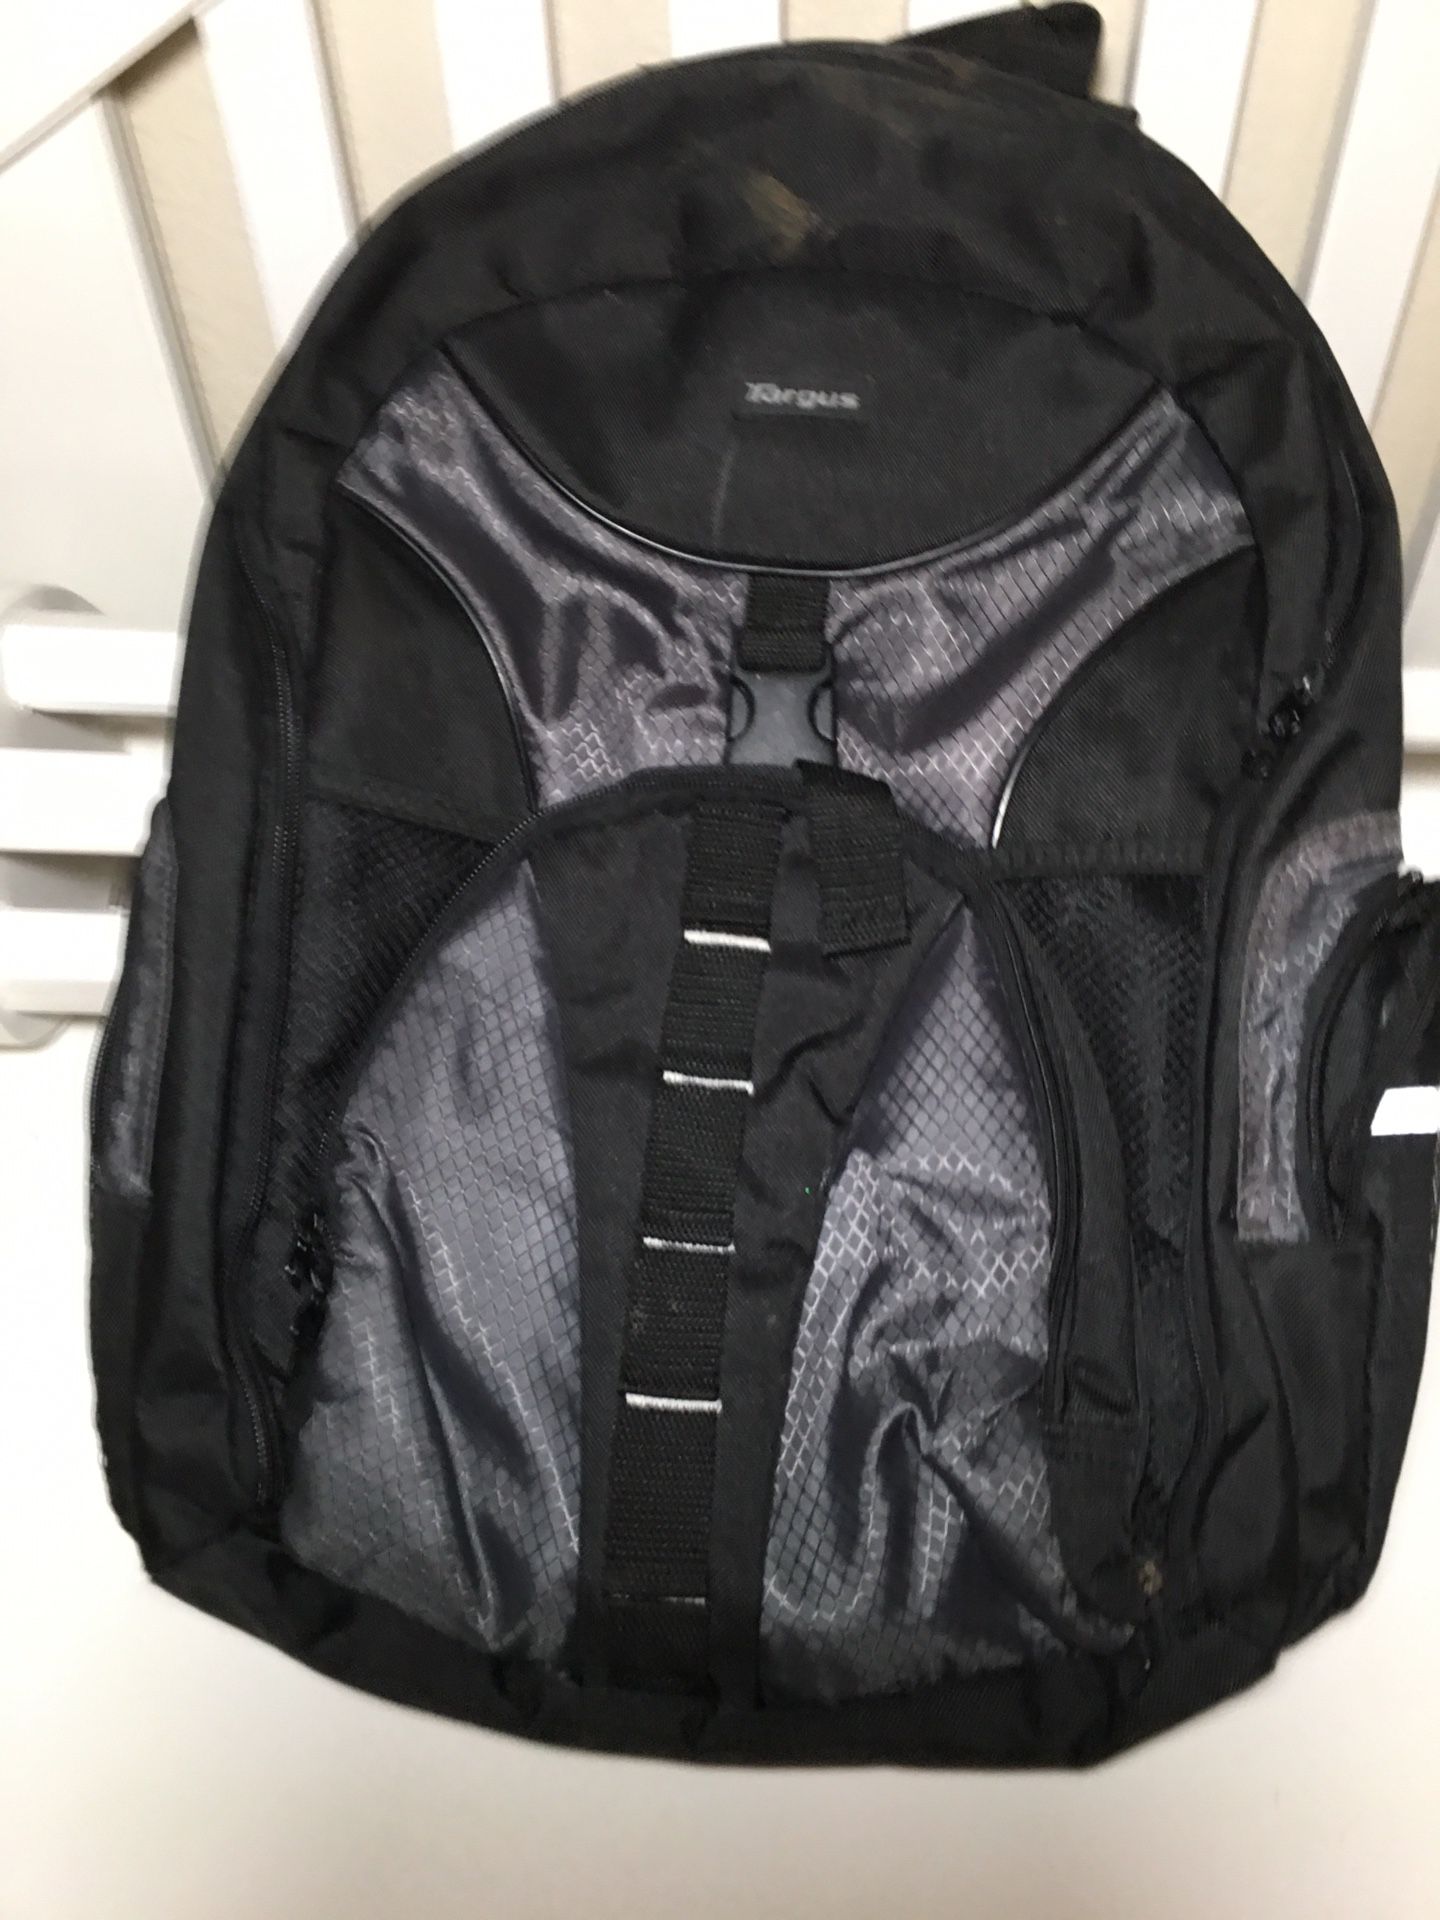 Targus Backpack and laptop bag